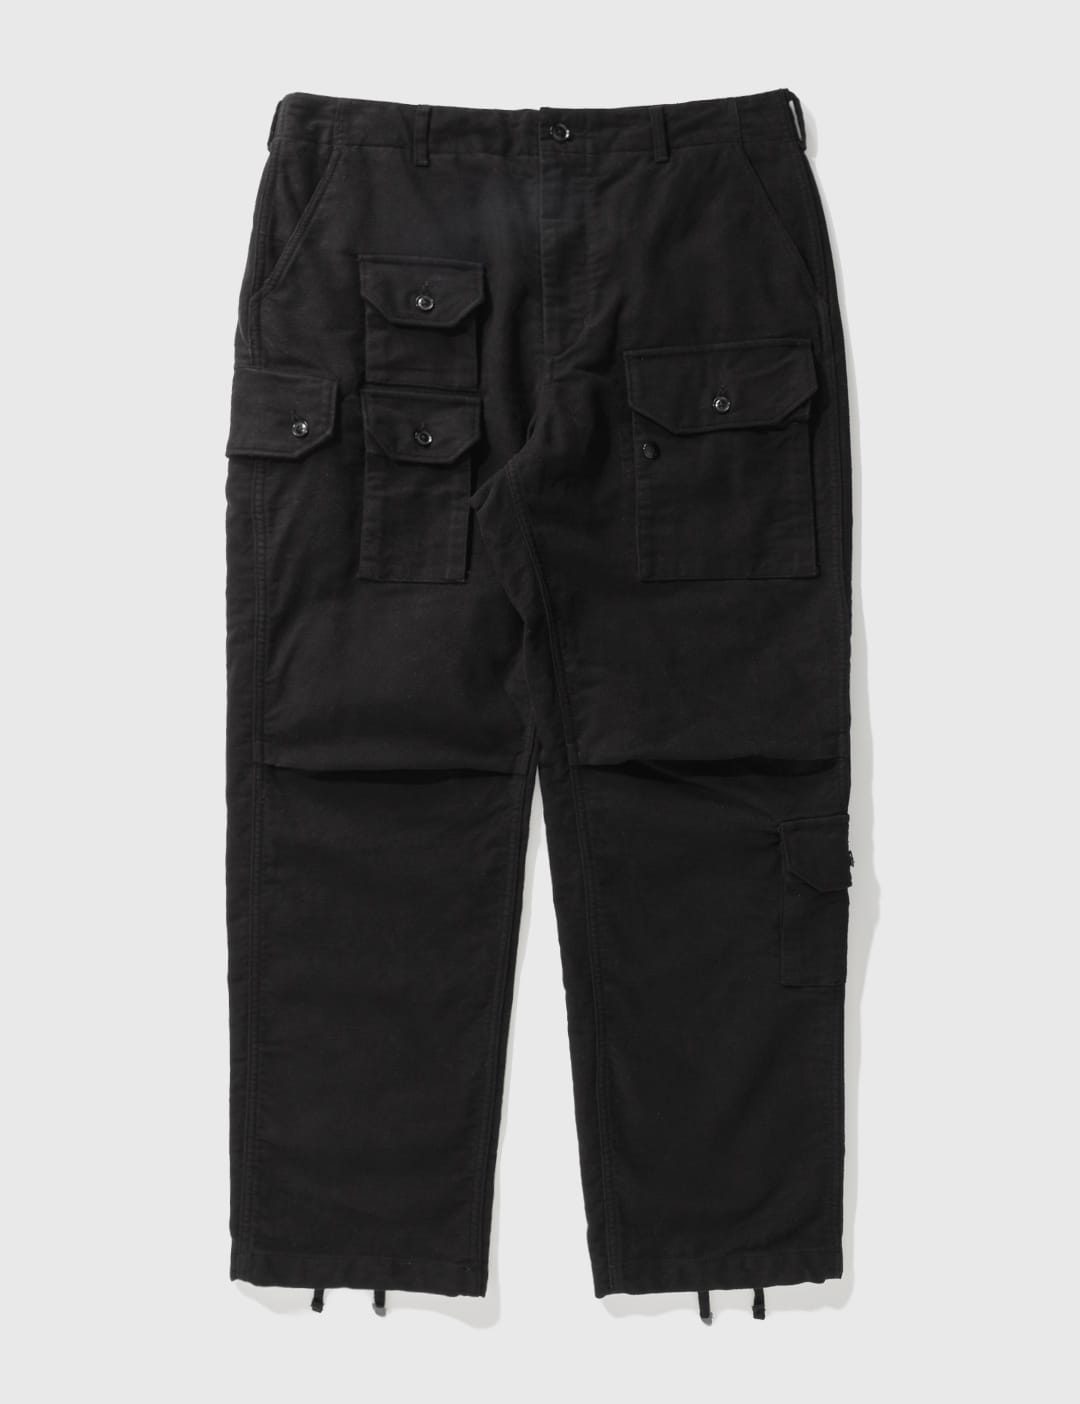 Nike - Nike X Stussy Insulated Pants | HBX - Globally Curated 